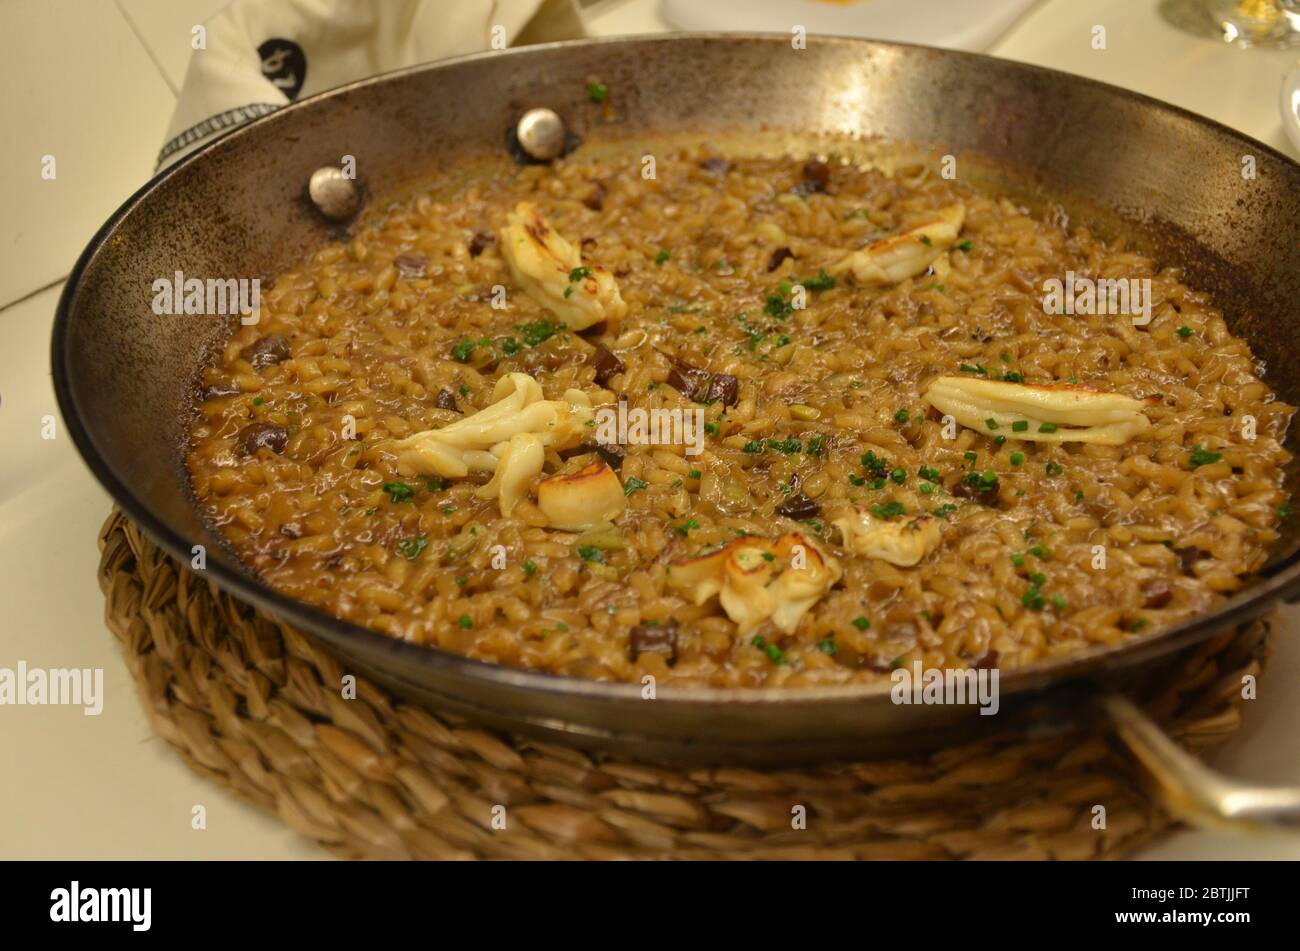 Paella is a Spanish rice dish originally from Valencia. Paella is one of the best-known dishes in Spanish cuisine. Stock Photo